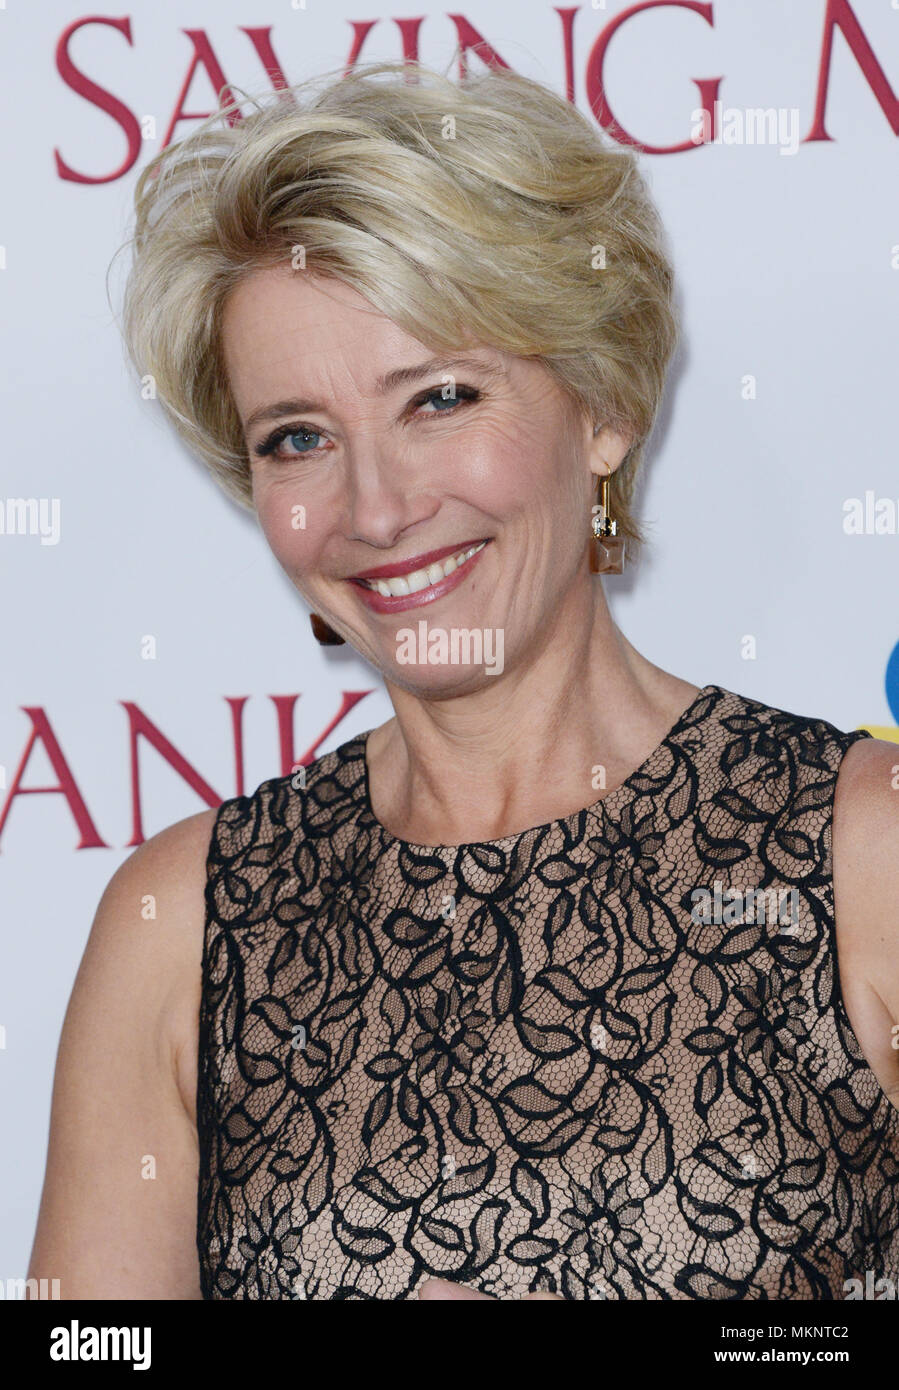 Emma Thompson  at  the premiere of 'Saving Mr. Banks' on the Disney Studio Lo in Burbank.Emma Thompson  Red Carpet Event, Vertical, USA, Film Industry, Celebrities,  Photography, Bestof, Arts Culture and Entertainment, Topix Celebrities fashion /  Vertical, Best of, Event in Hollywood Life - California,  Red Carpet and backstage, USA, Film Industry, Celebrities,  movie celebrities, TV celebrities, Music celebrities, Photography, Bestof, Arts Culture and Entertainment,  Topix, headshot, vertical, one person,, from the year , 2013, inquiry tsuni@Gamma-USA.com Stock Photo